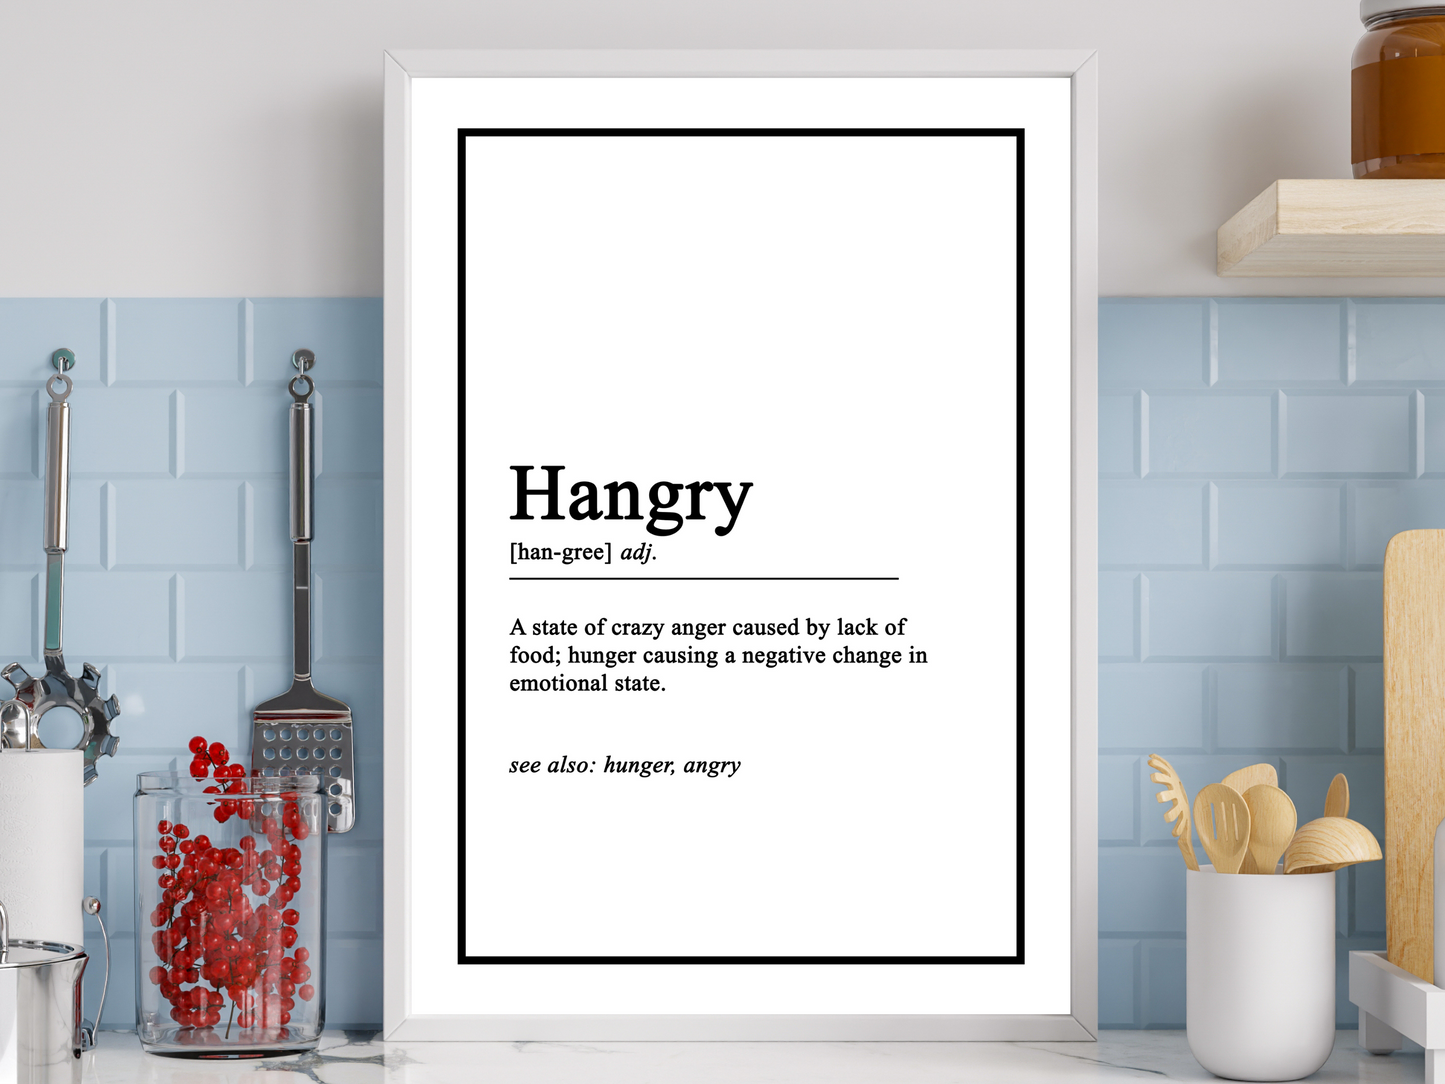 Hangry Definition